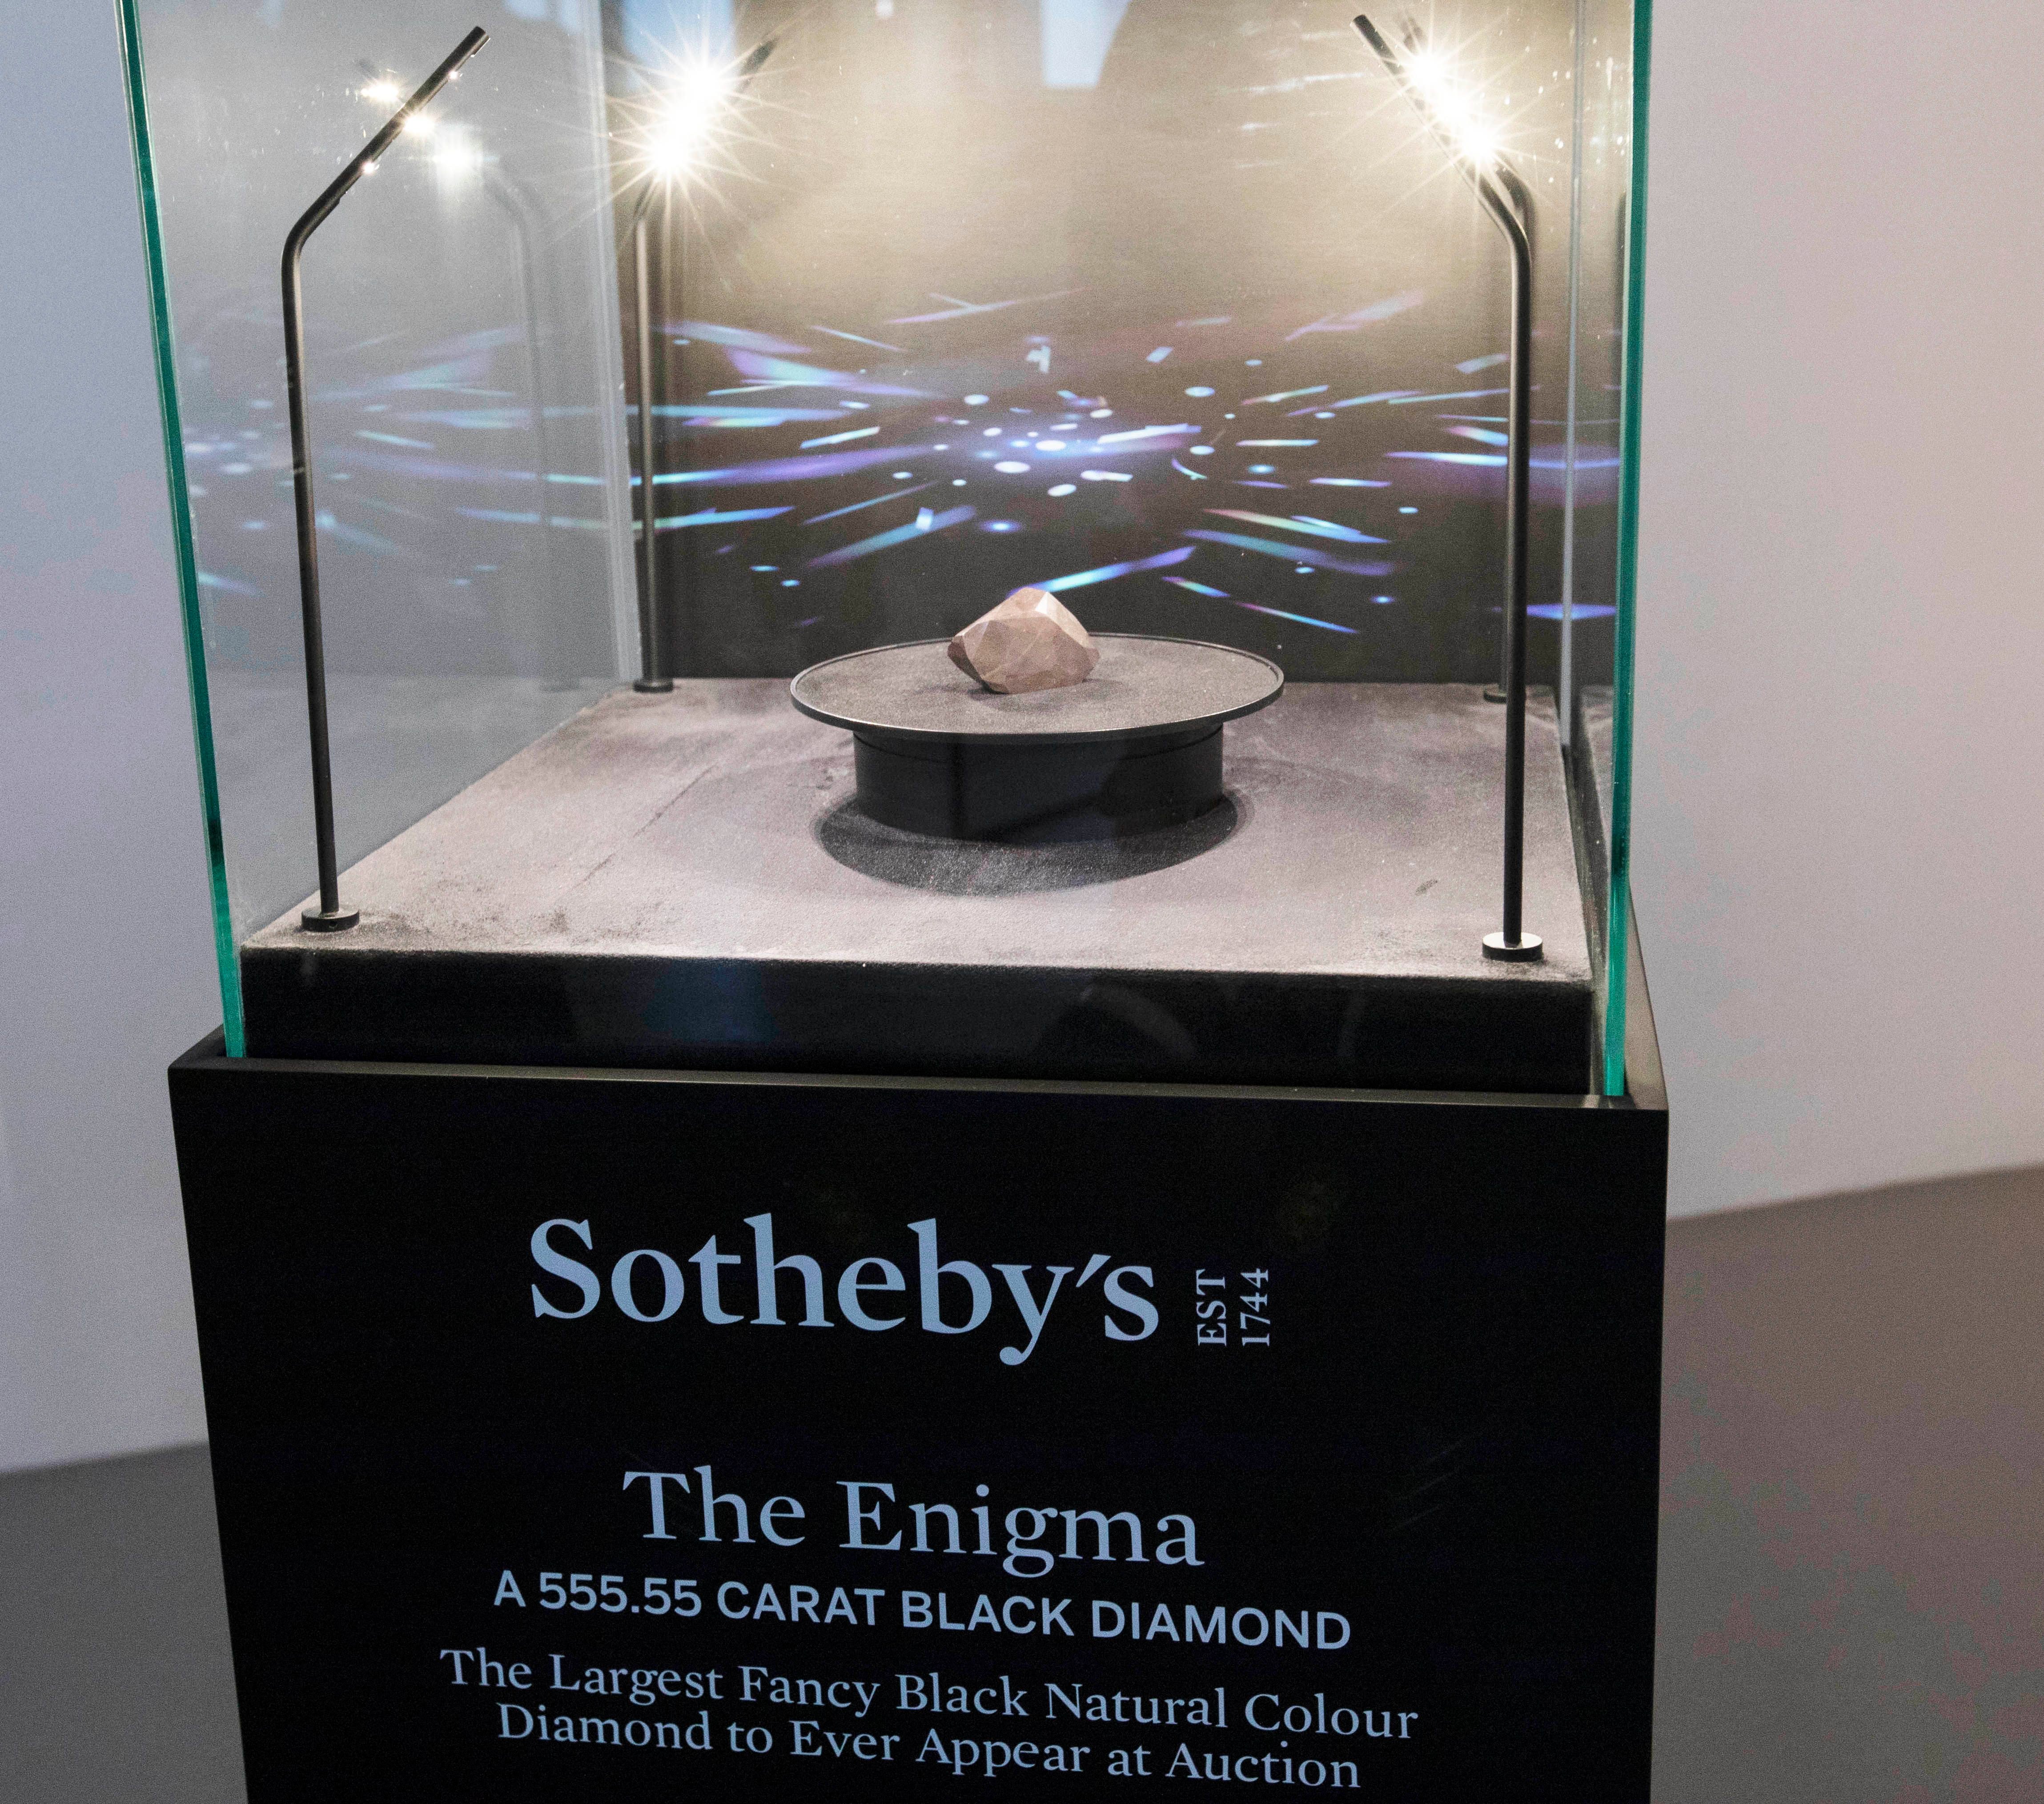 The Enigma: Mysterious black diamond up for auction - BBC News